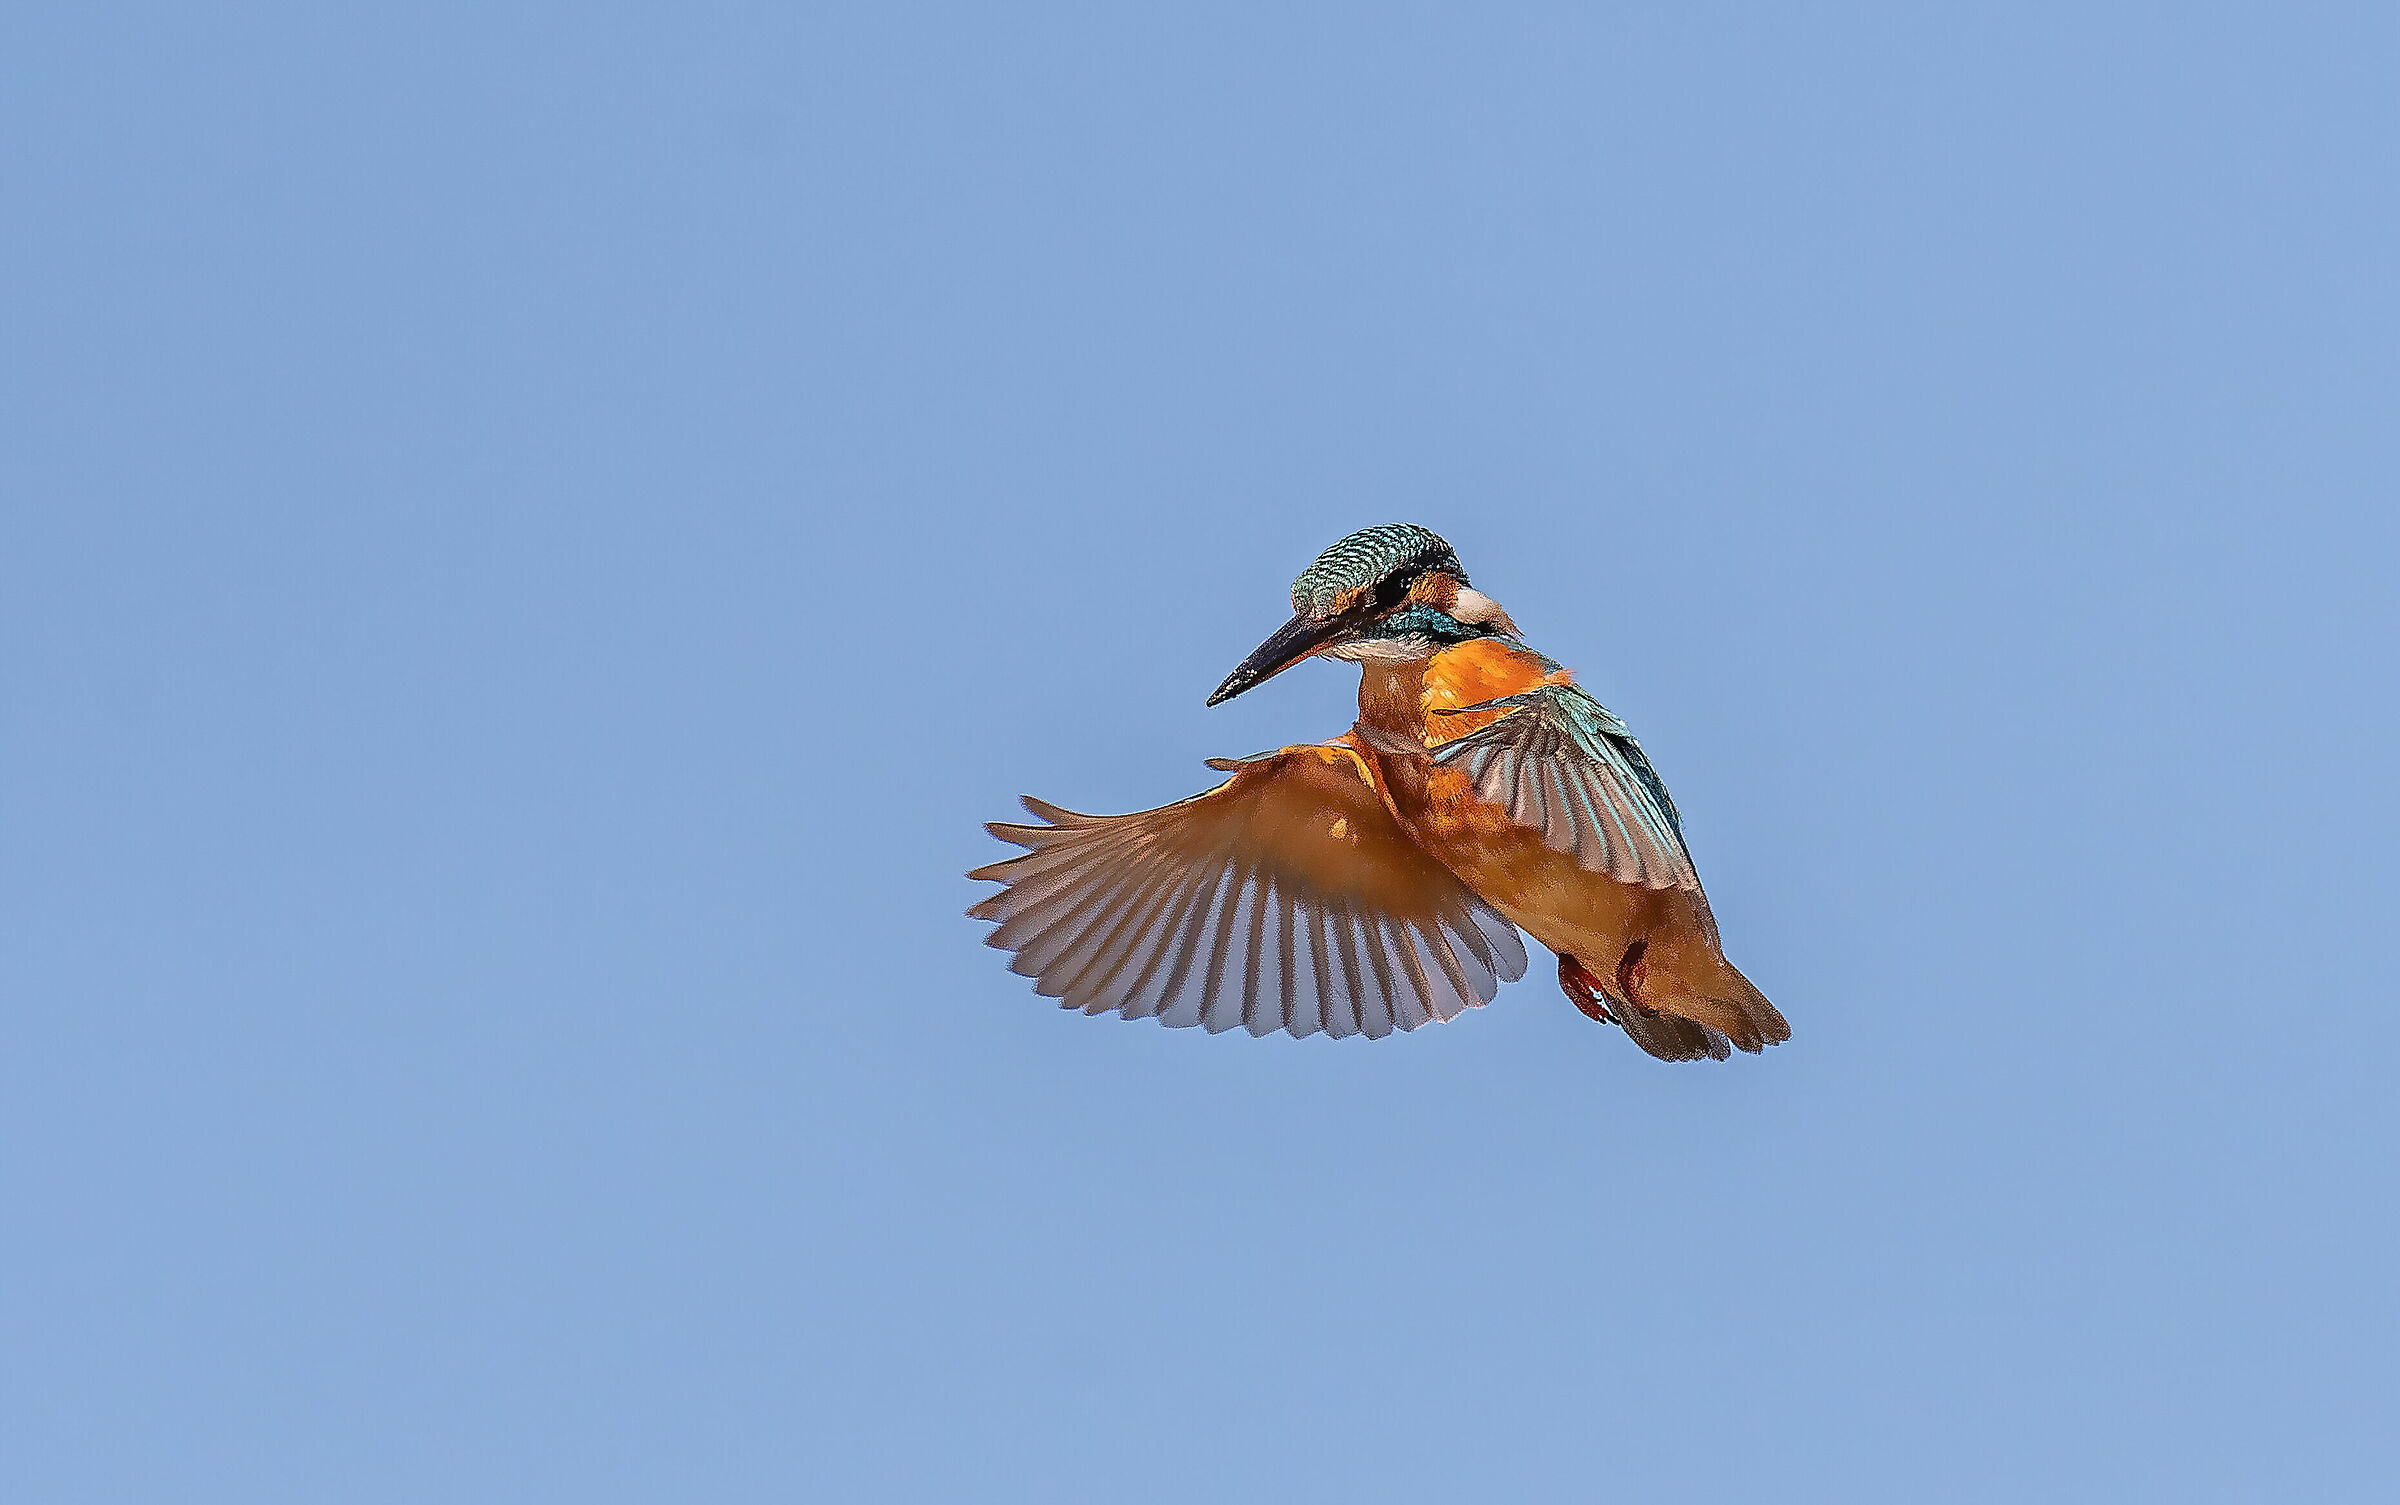 Kingfisher in the Holy Spirit...